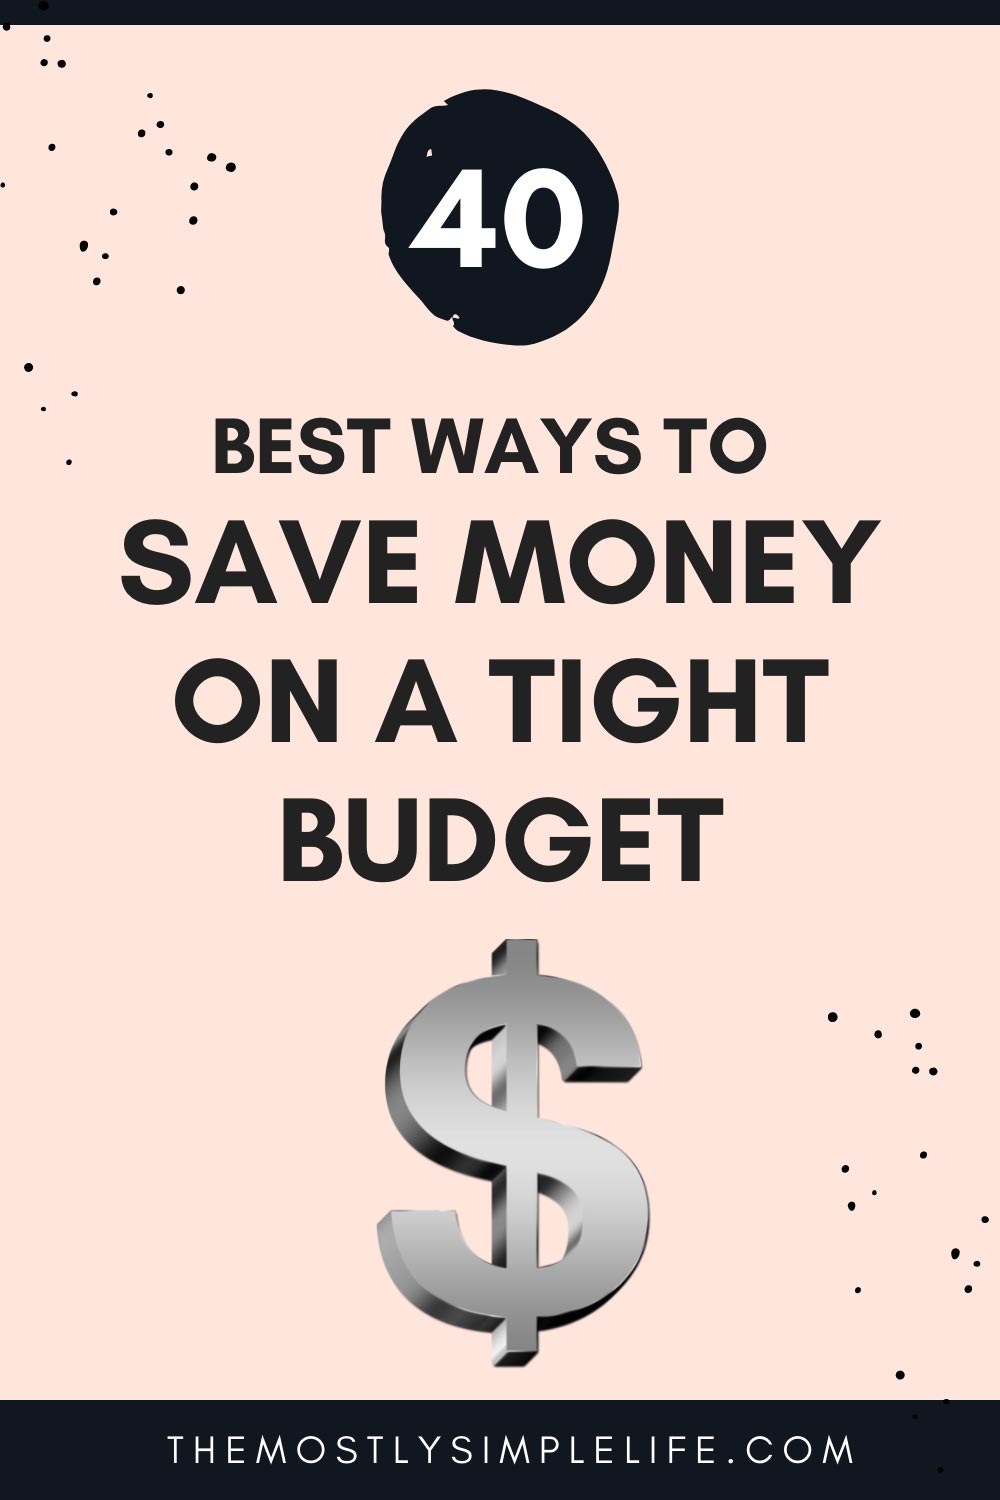 40 Best Ways to Save Money on a Tight Budget